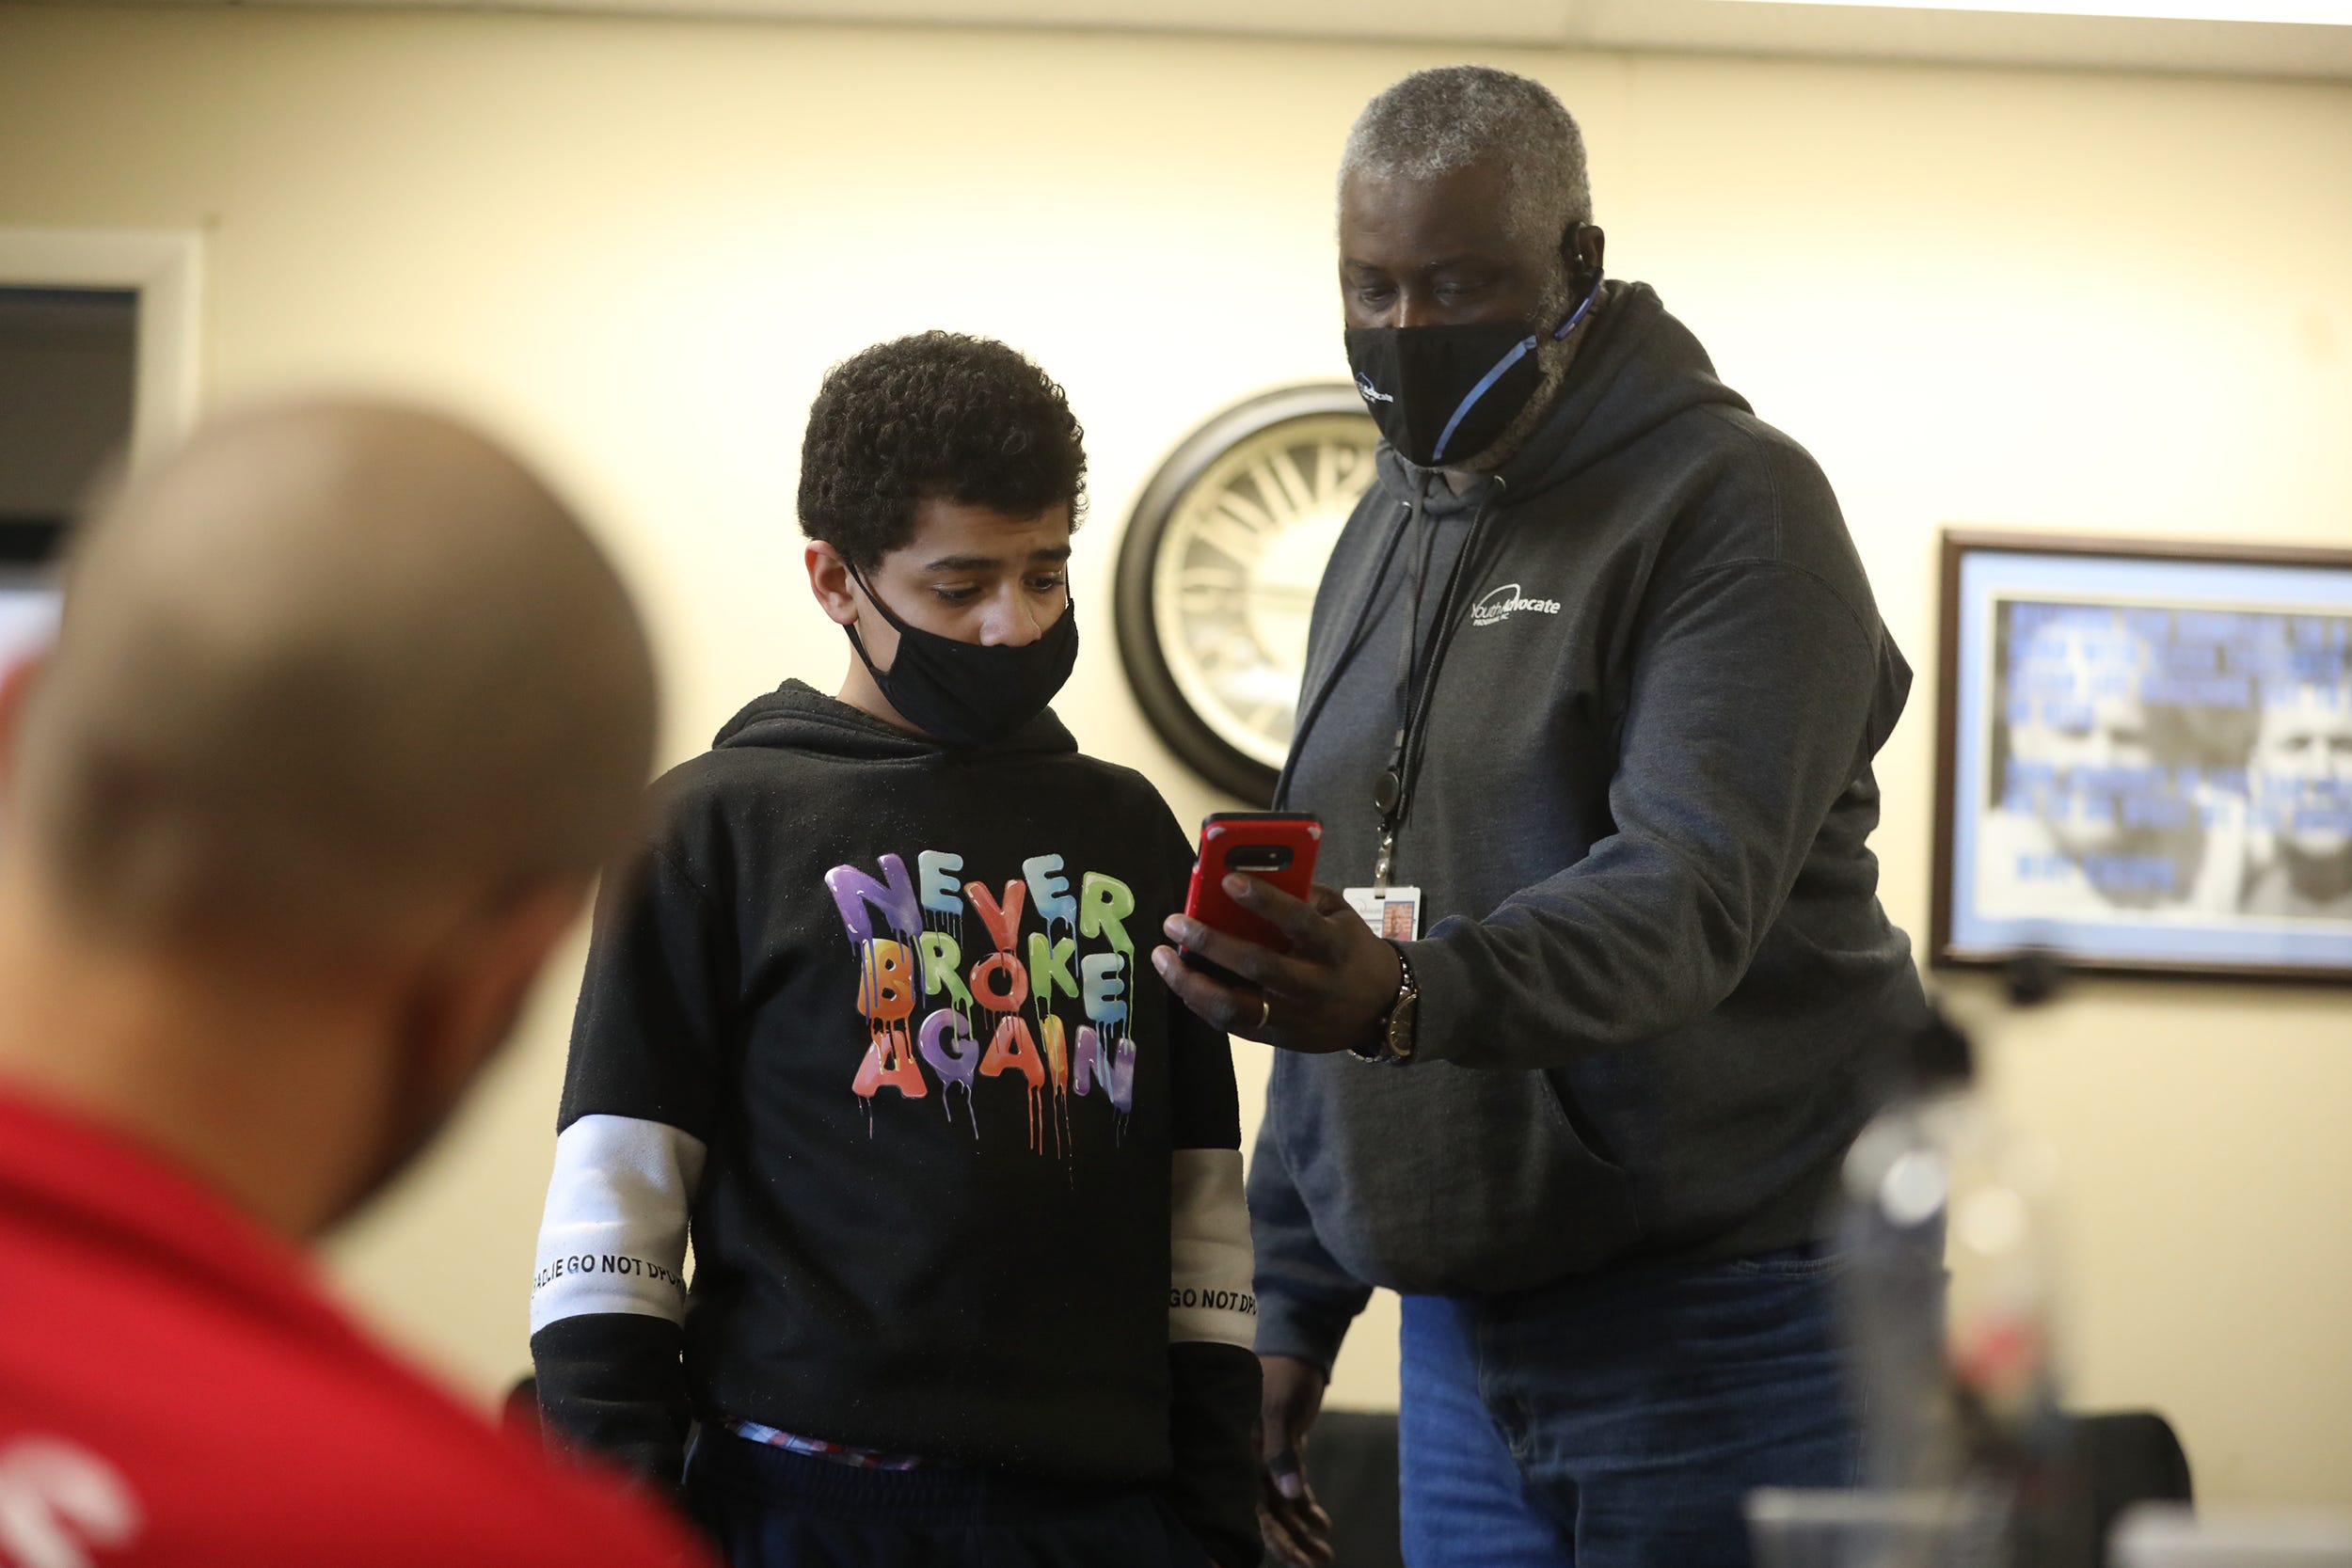 After his release from prison, James Schuler says he was on a mission to keep kids from prison, to "steal as many young people from that monster of a system." Schuler is shown here helping Kamal Nelson, 13, of Lyons, NY.